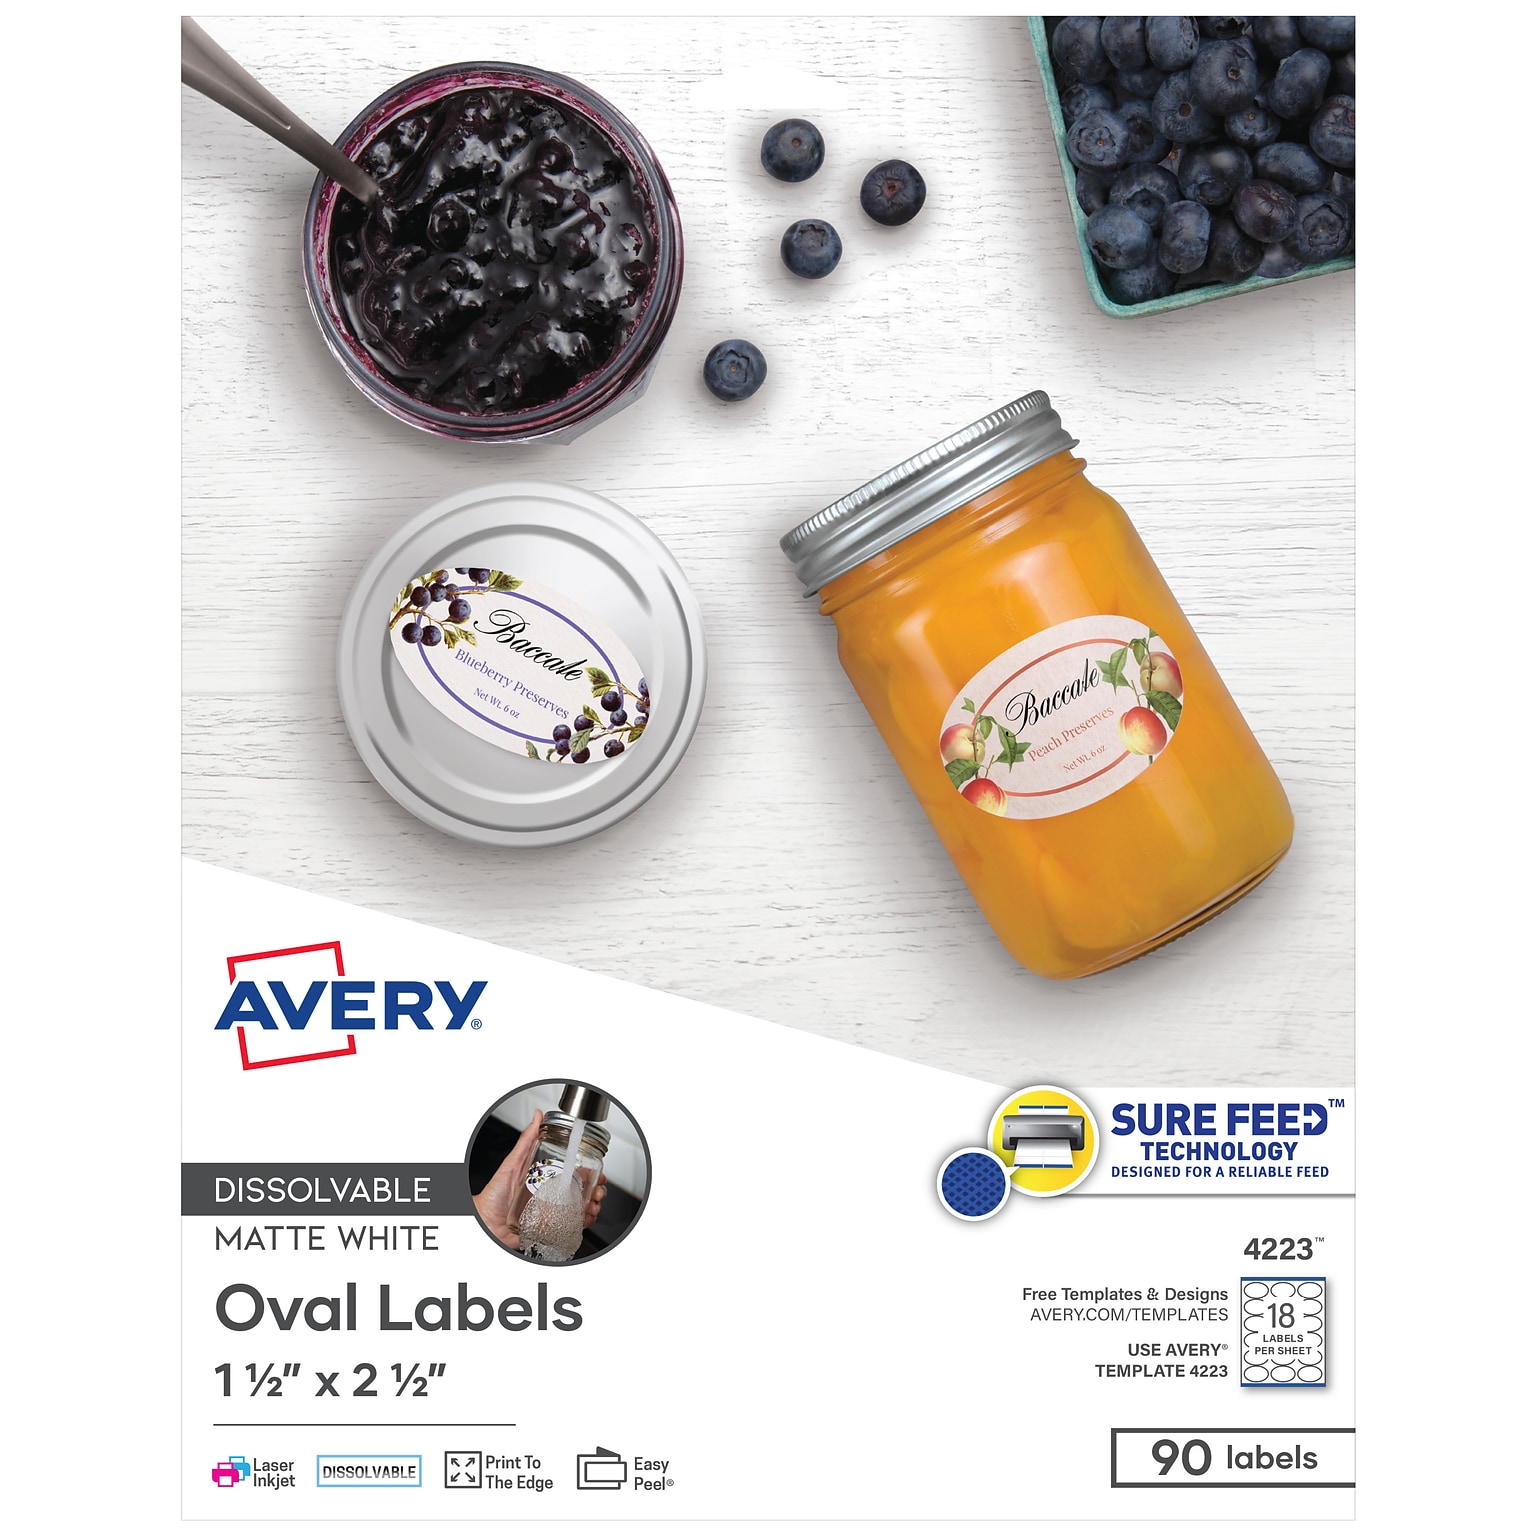 Avery Sure Feed Dissolvable Laser/Inkjet Labels, 1 1/2x 2 1/2, White, 18 Labels/Sheet, 5 Sheets/Pack, 90 Labels/Pack (4223)